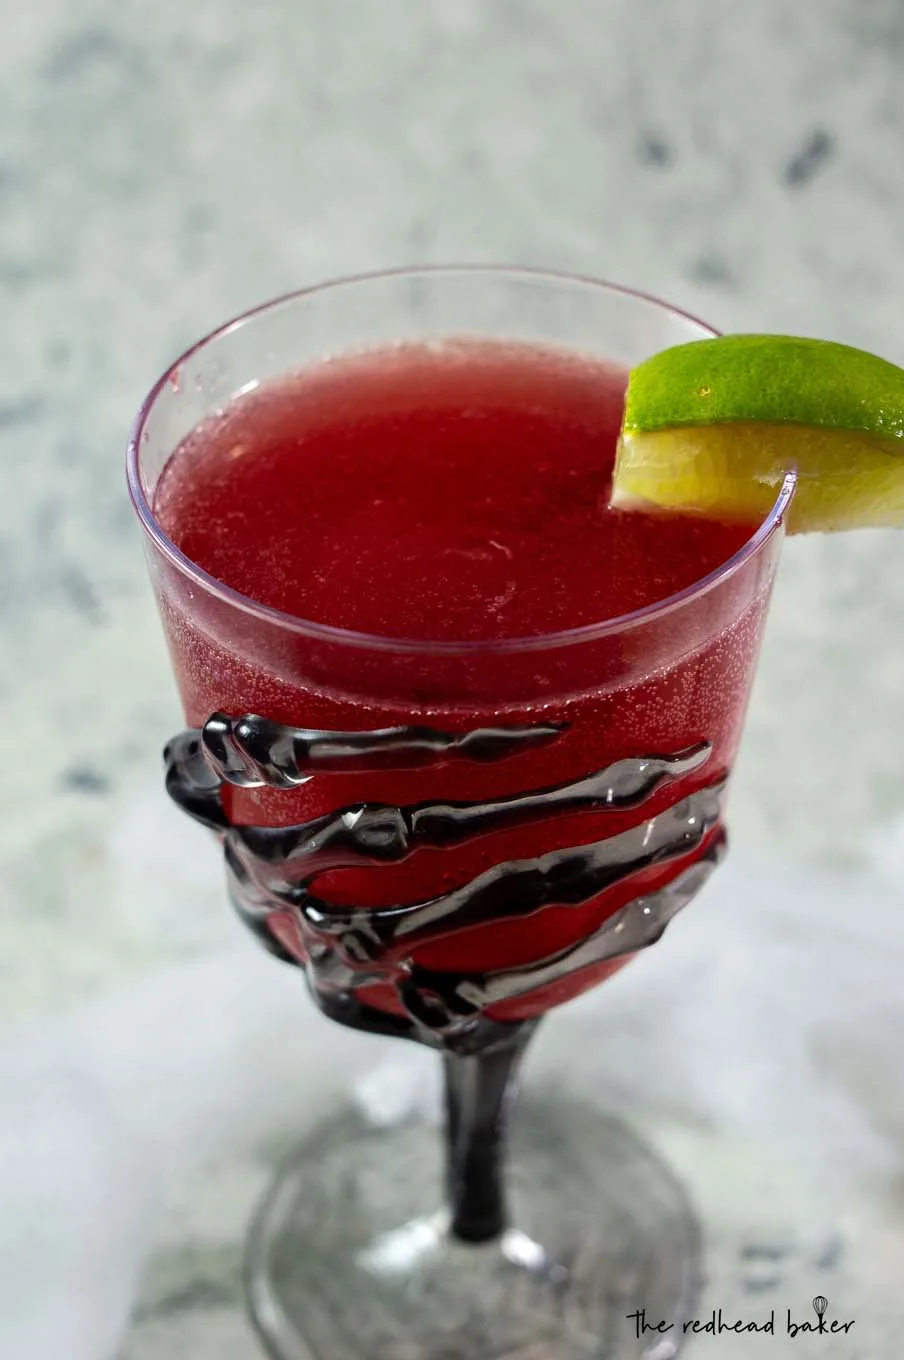 A close-up of a glass of pomegranate margarita